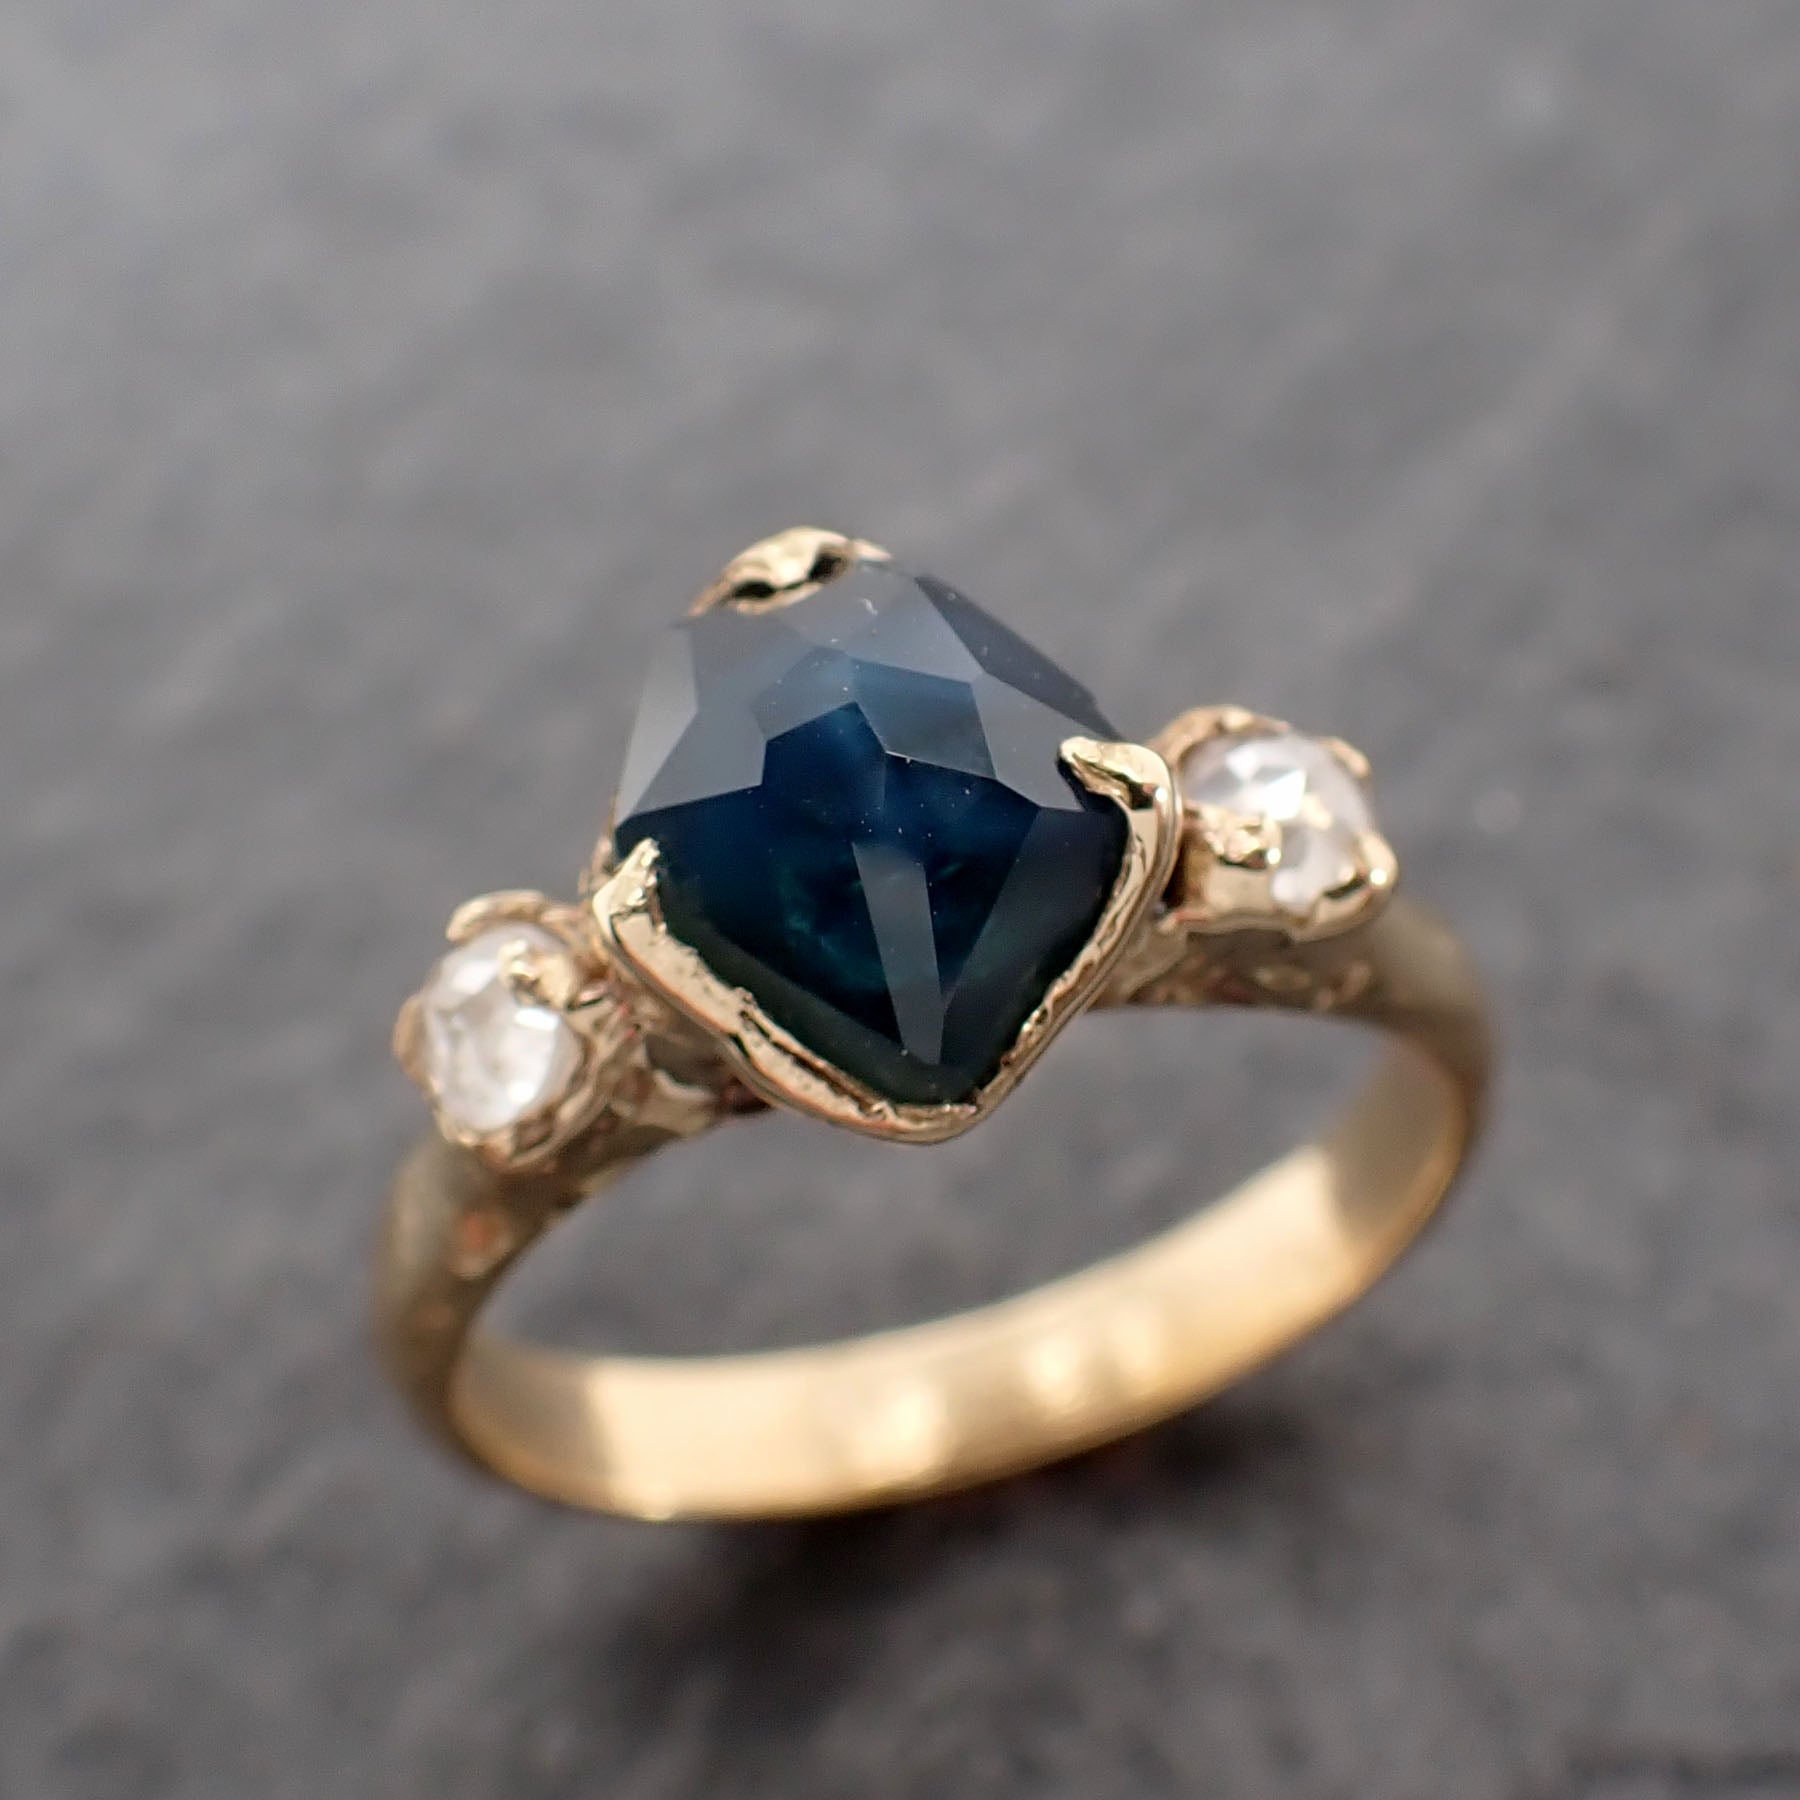 Partially faceted blue Montana Sapphire and fancy Diamonds 18k Yellow Gold Engagement Wedding Ring Gemstone Ring Multi stone Ring 2529